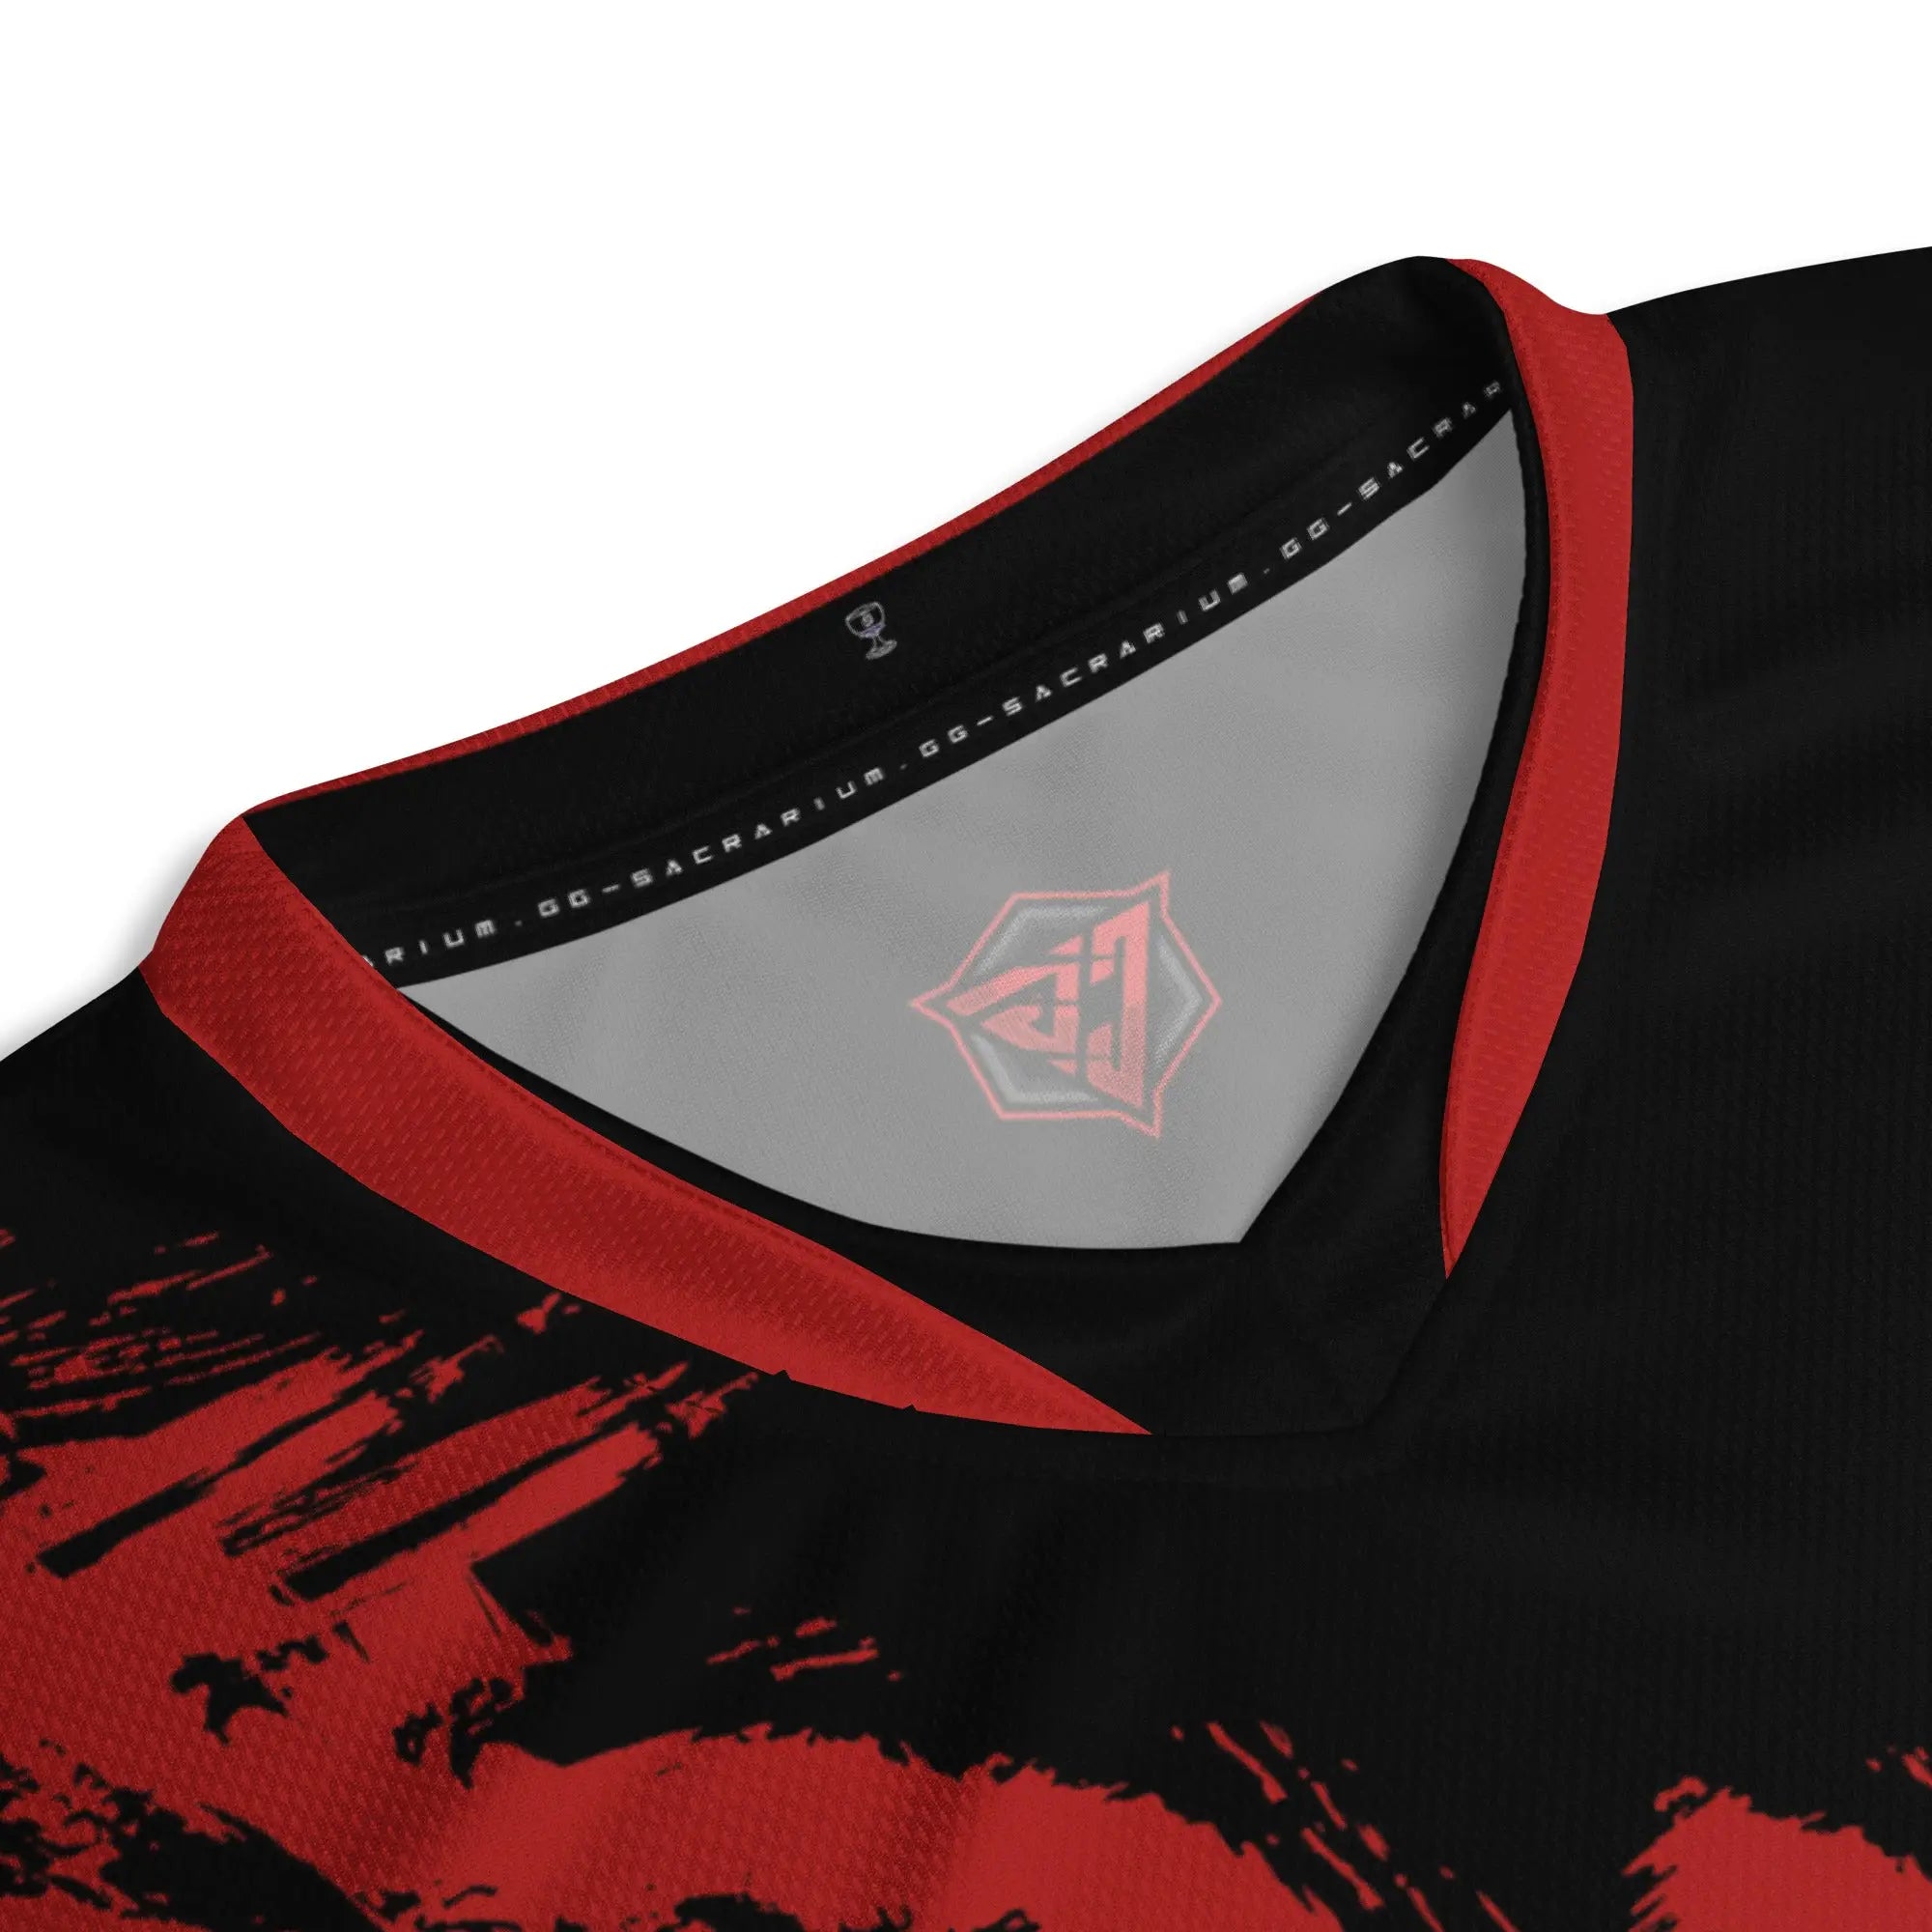 Core Gaming Jersey